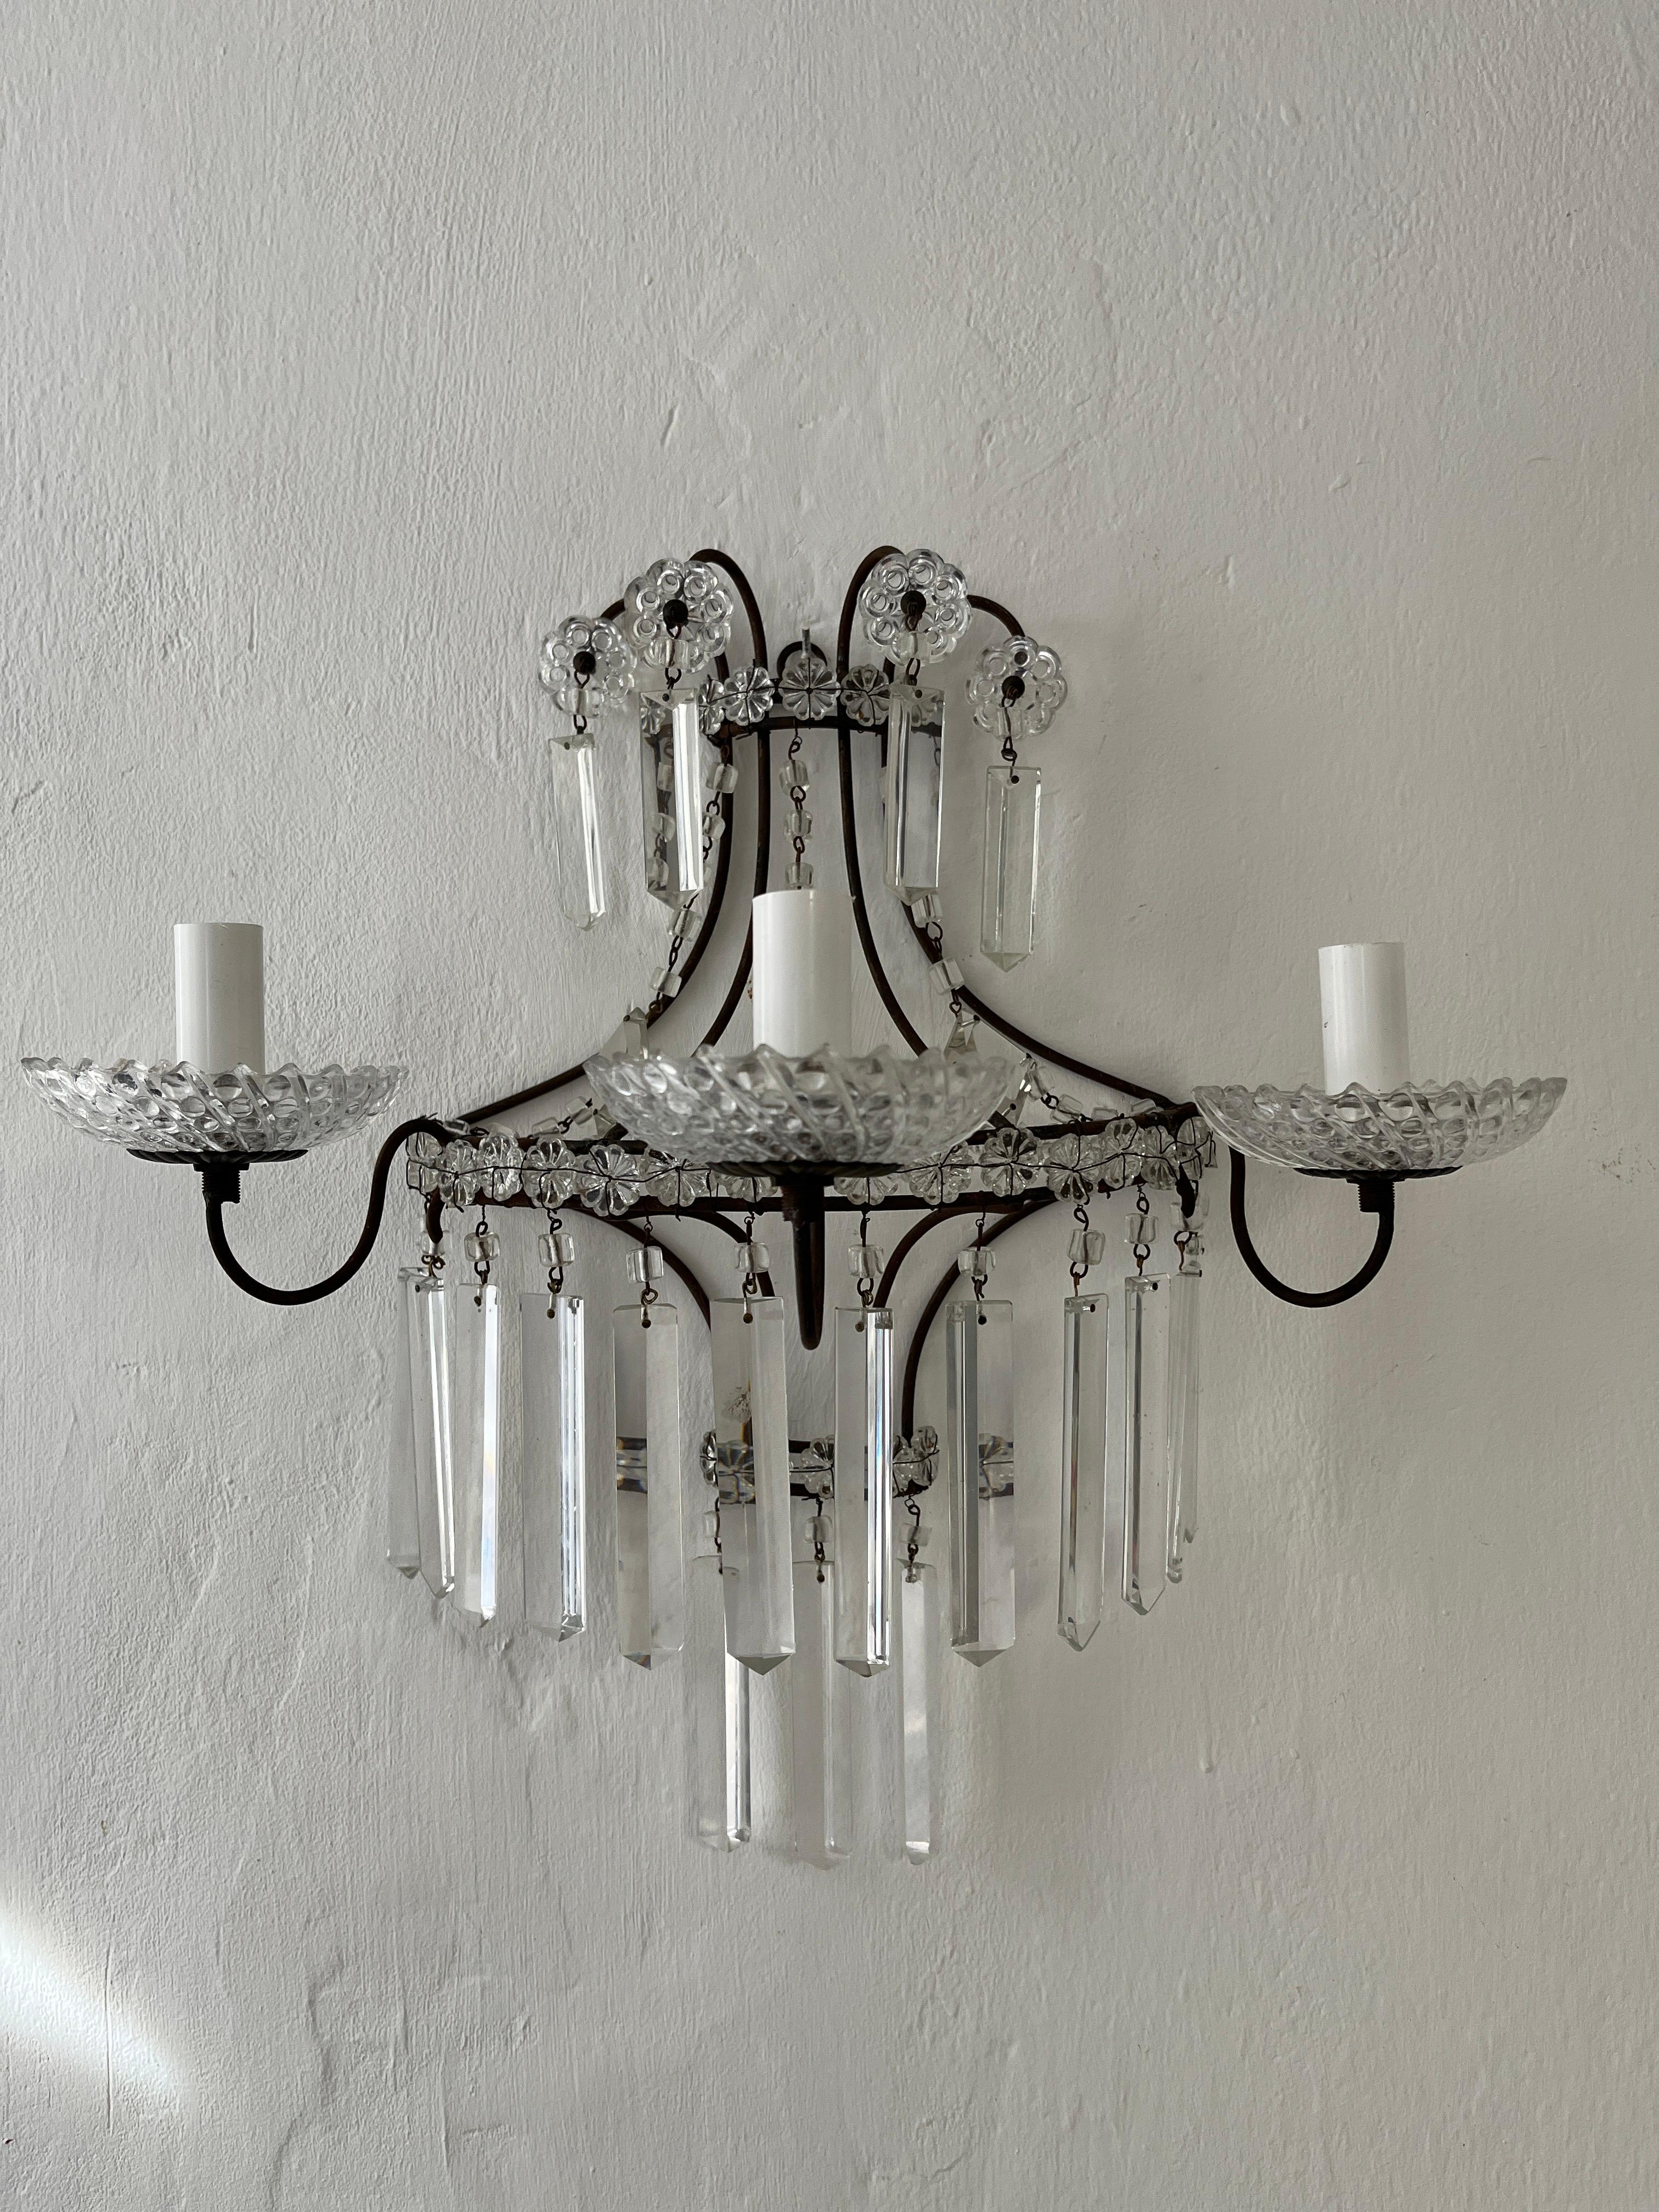 Early 20th Century French Crystal Prisms 3 Light Extremely Old and Stunning Sconces c 1900 For Sale